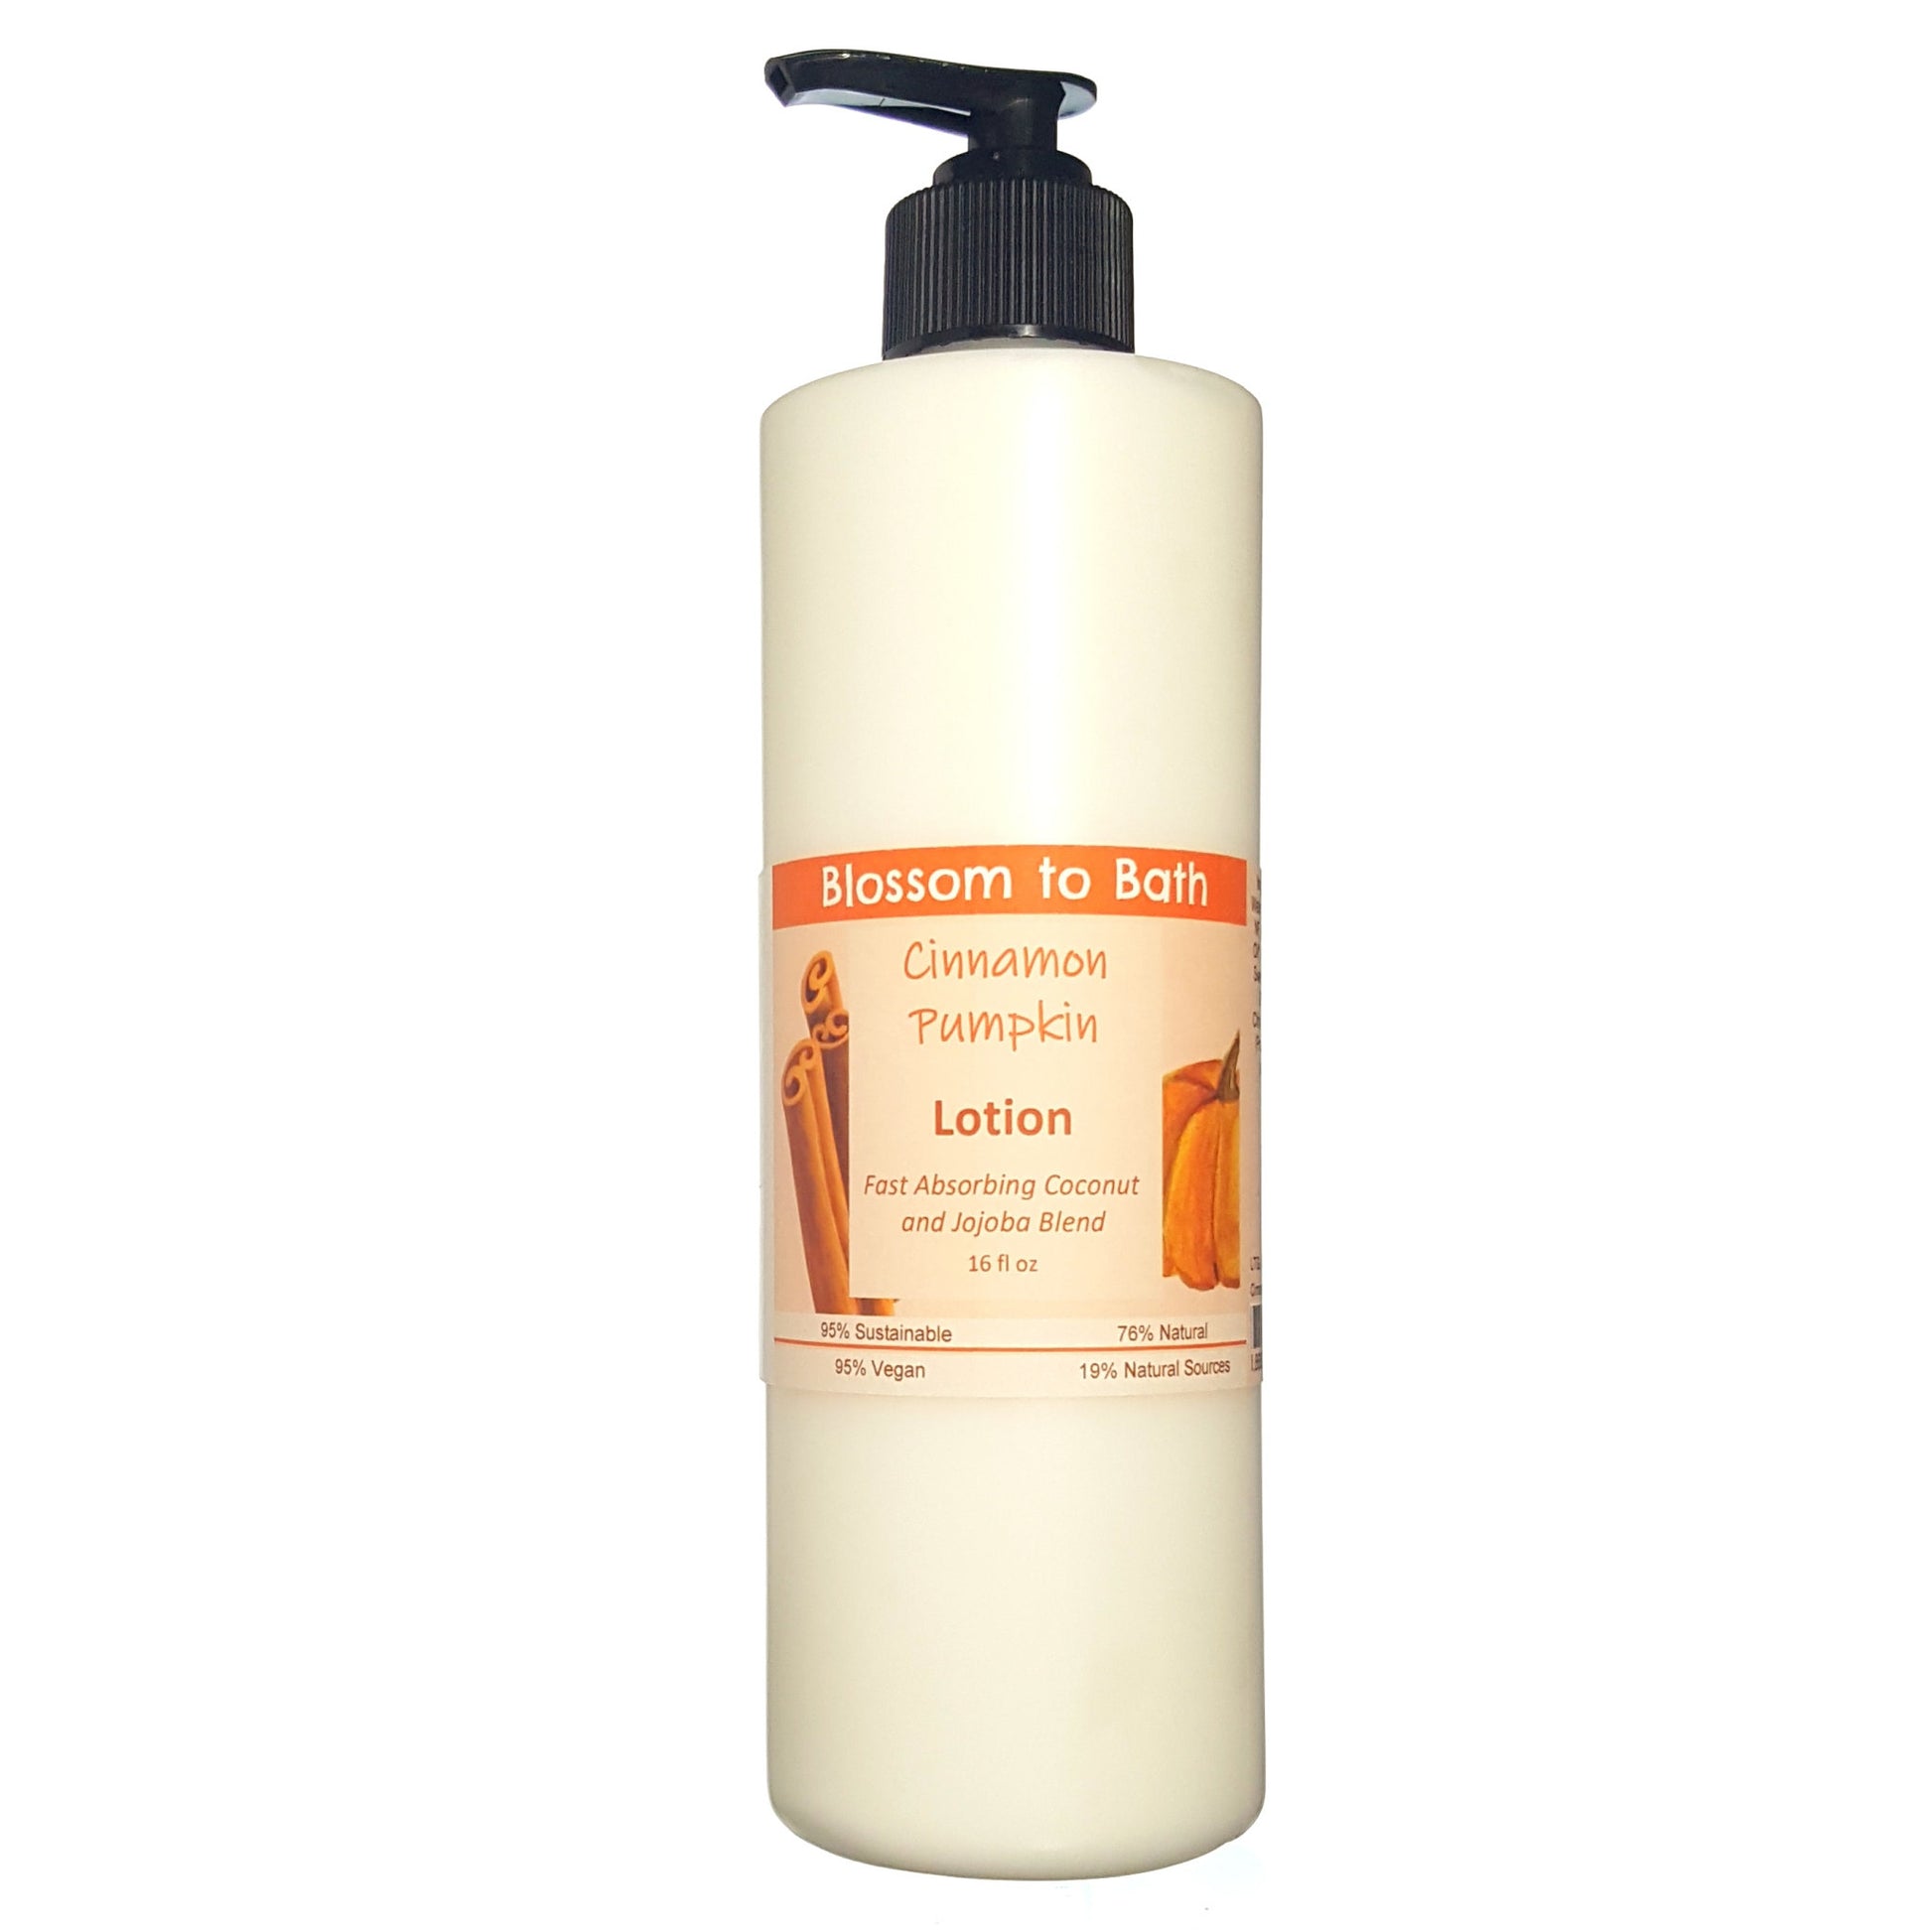 Buy Blossom to Bath Cinnamon Pumpkin Lotion from Flowersong Soap Studio.  Daily moisture luxury that soaks in quickly made with organic oils and butters that soften and smooth the skin  An engaging, cheerful scent filled with sweet vanilla and warm spice.